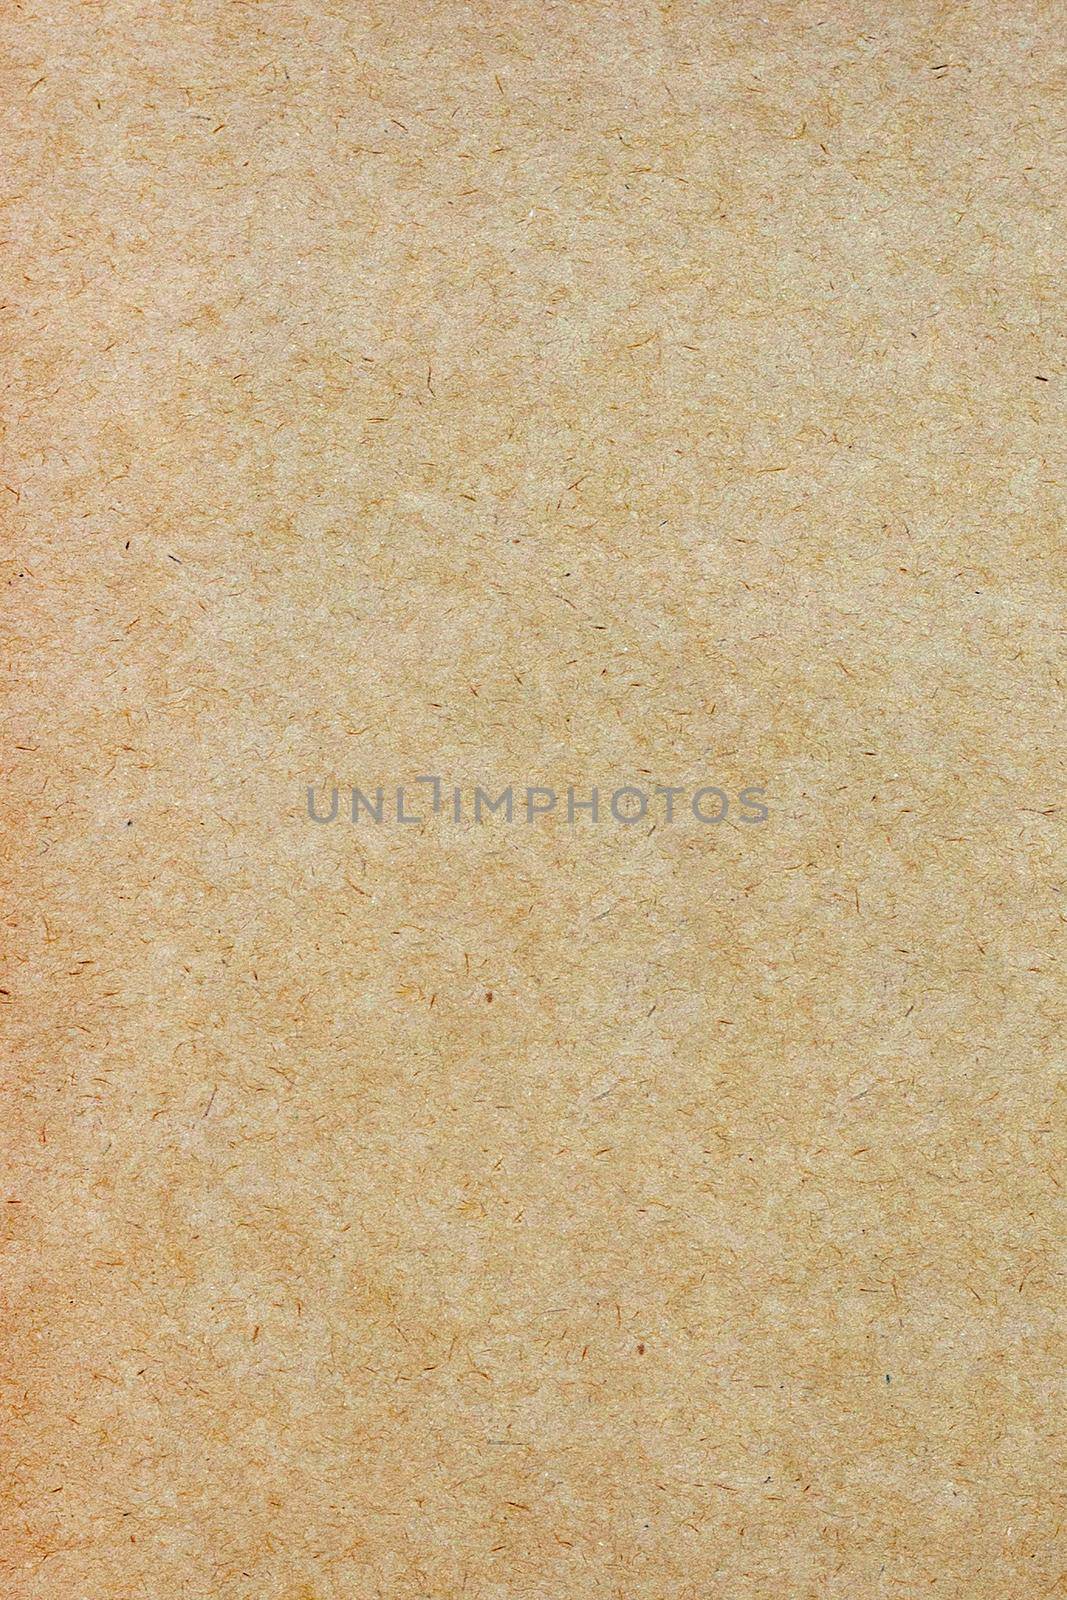 Sheet of brown paper or cardboard texture for background.